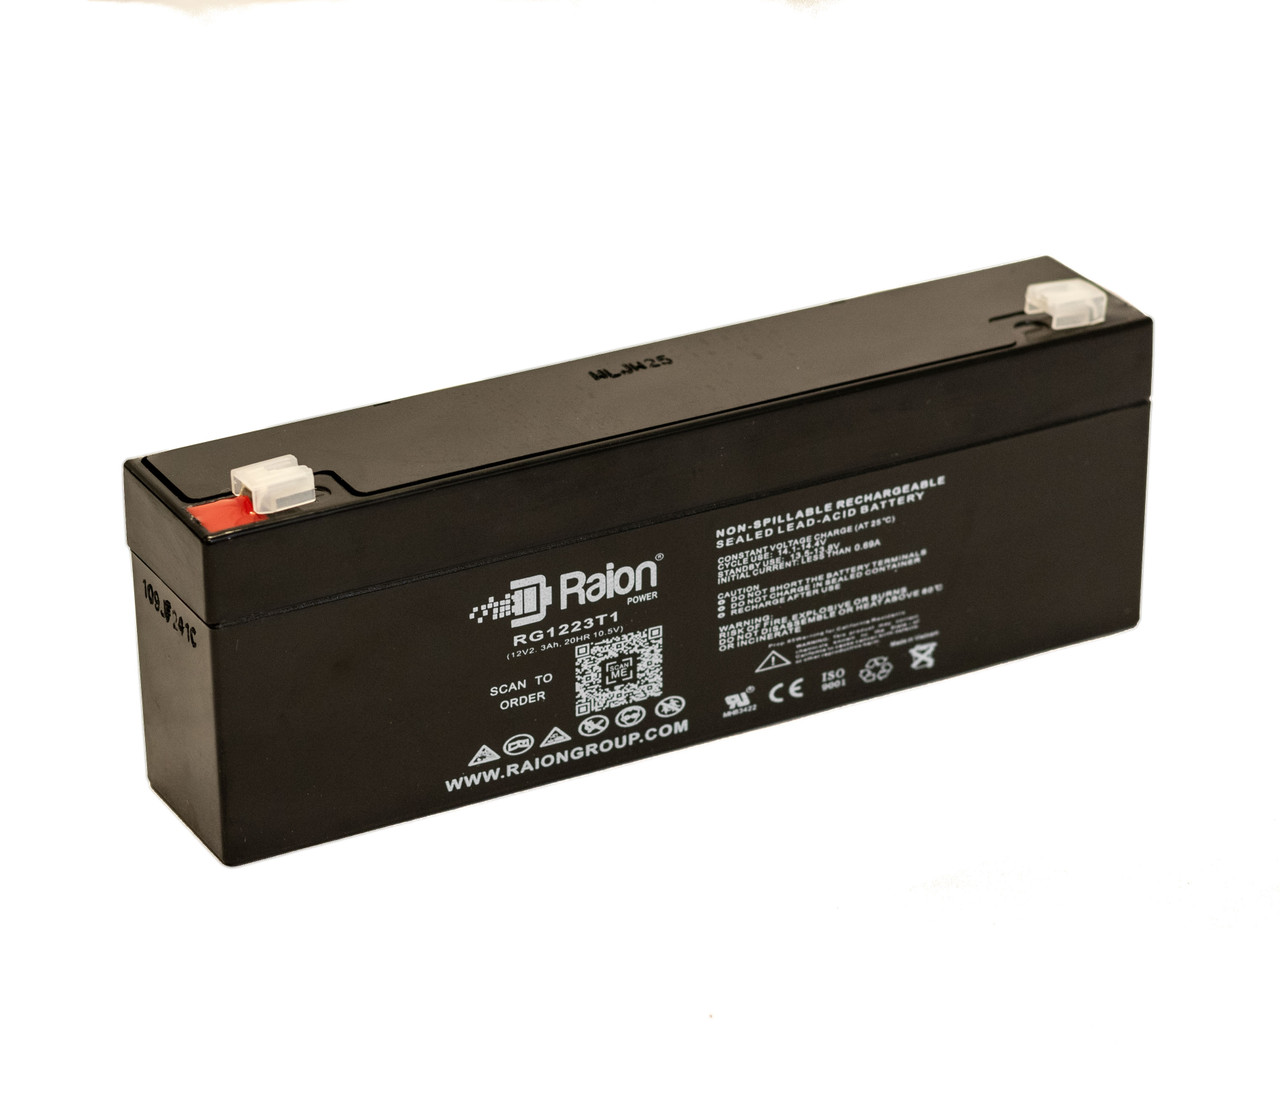 Raion Power RG1223T1 Replacement Battery for GS Portalac PE12V2.2F1